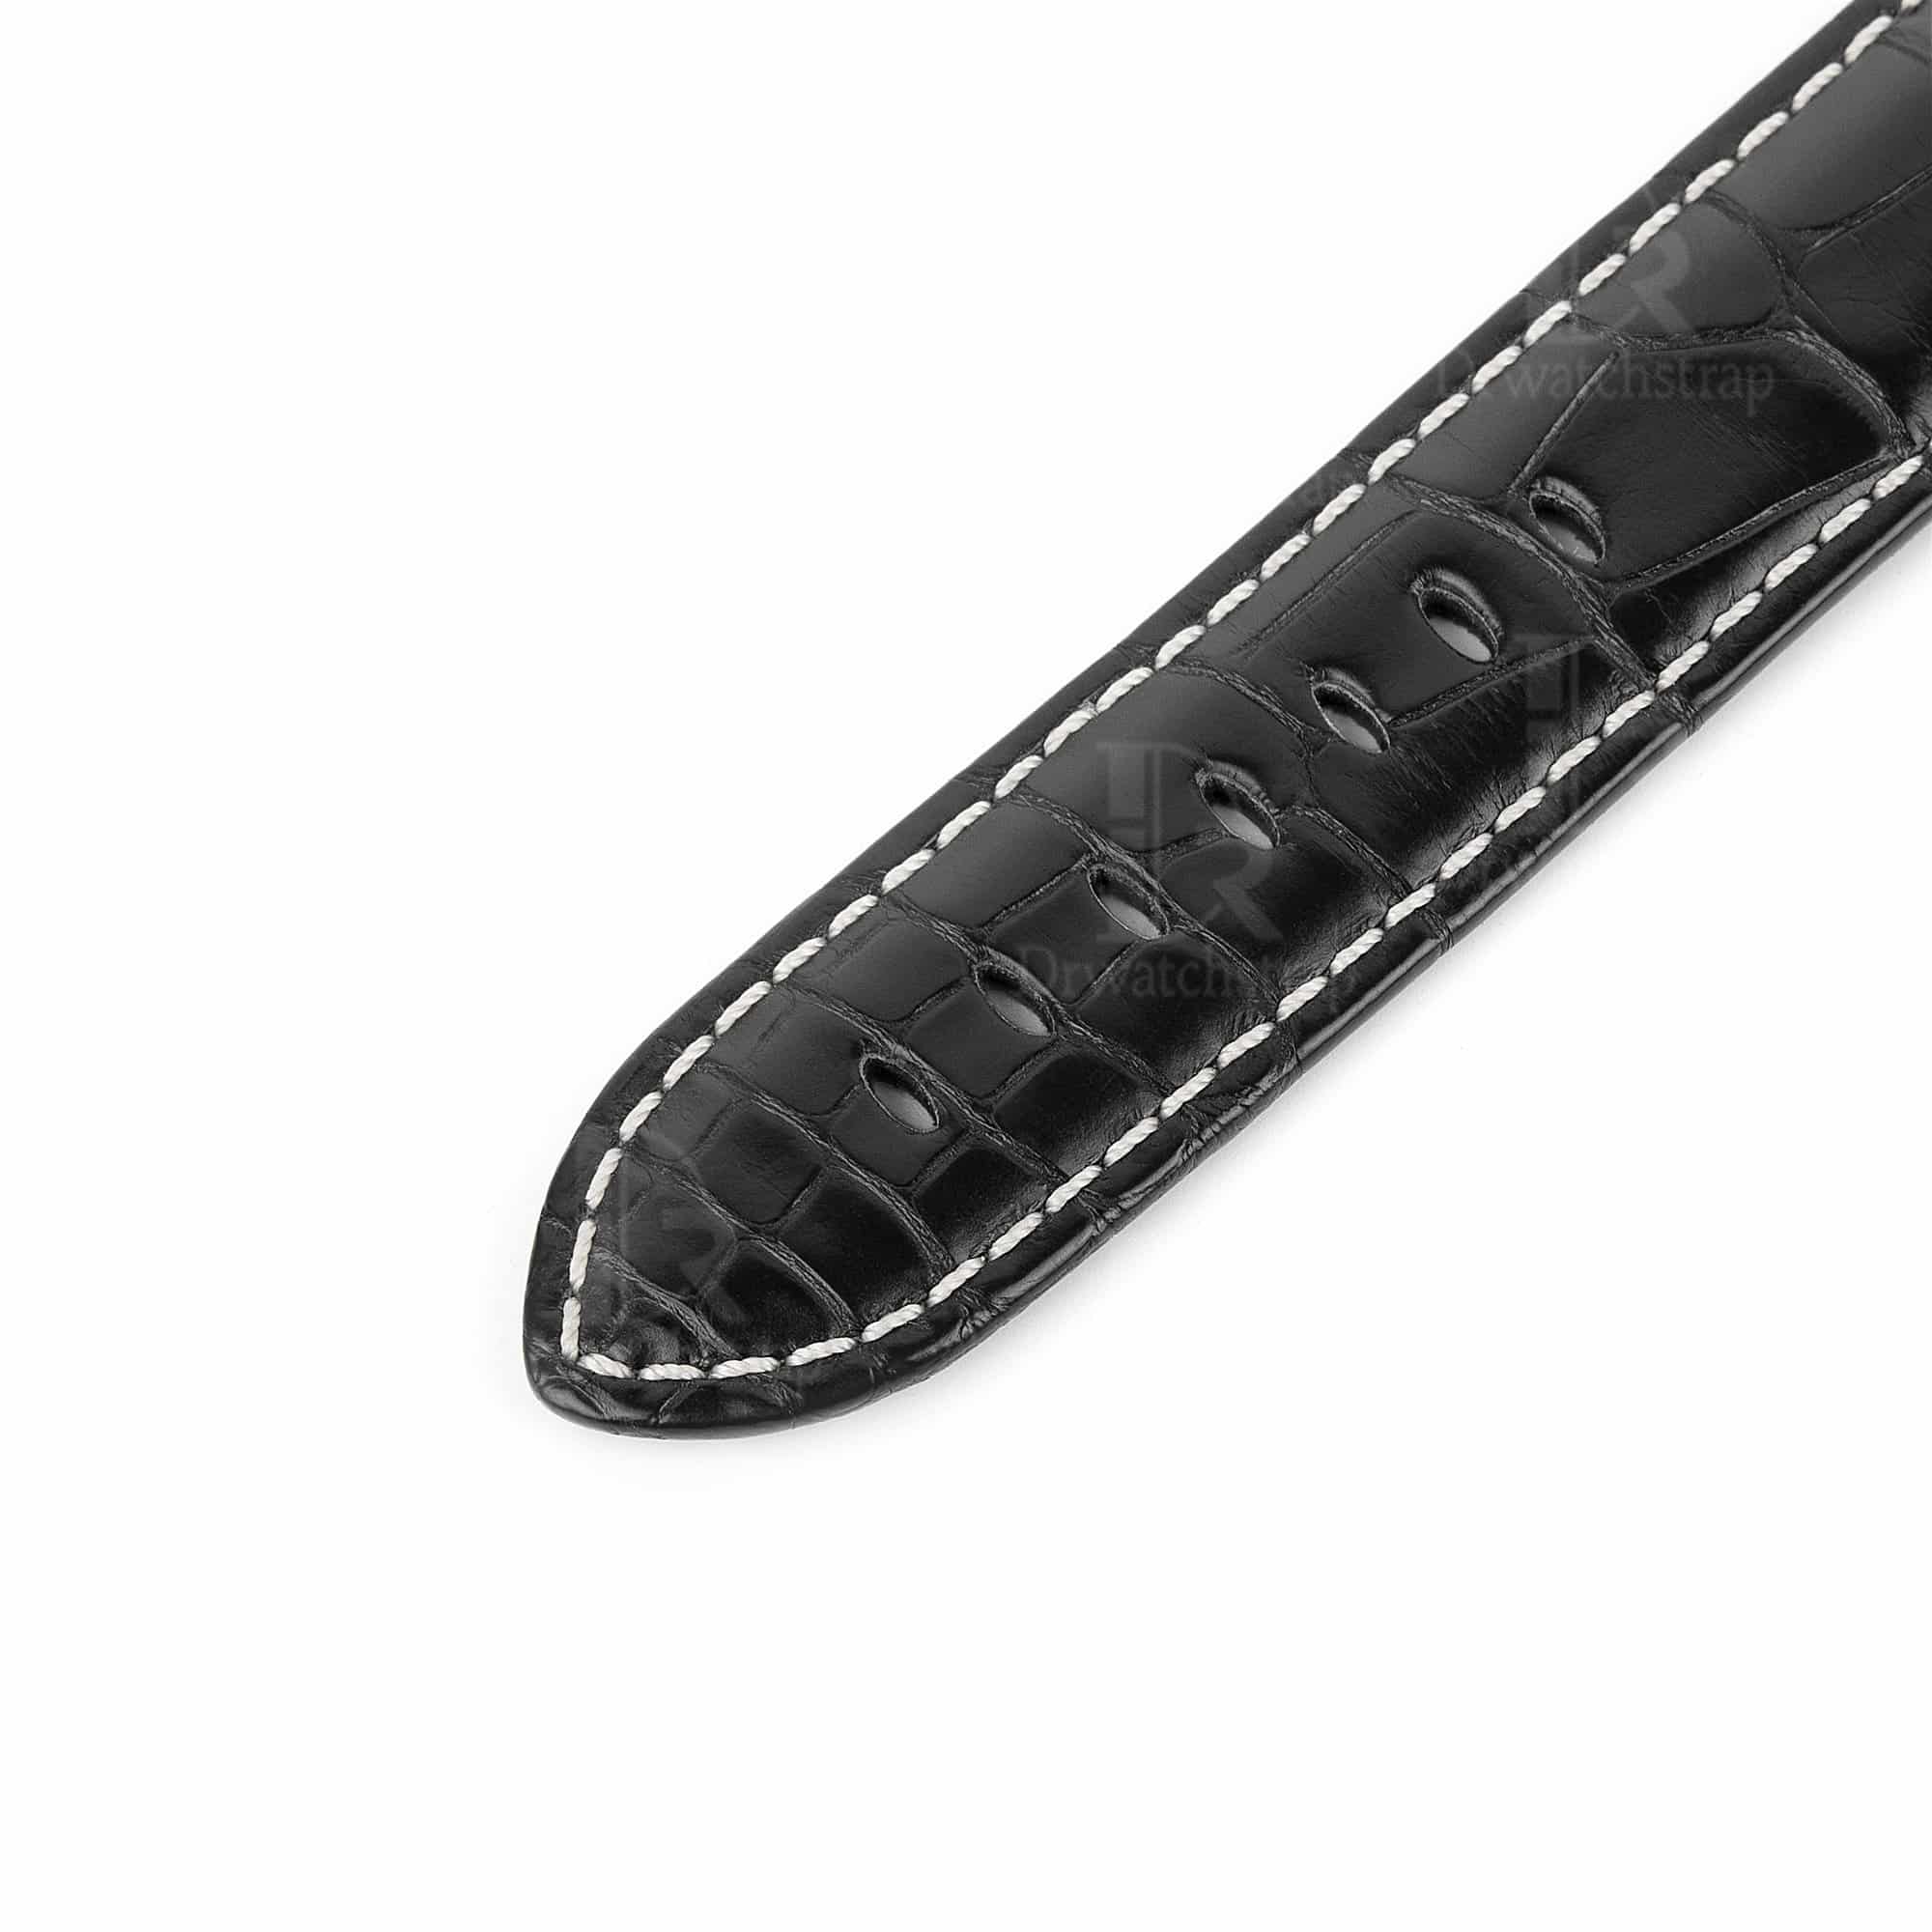 Genuine best quality OEM handmade custom Black Panerai Alligator Strap and watch band replacement 22mm 24mm for Panerai Luminor Due luxury watches from dr watchstrap for sale - Shop the premium crocodile material leather straps and watch bands wholesale online at a low price